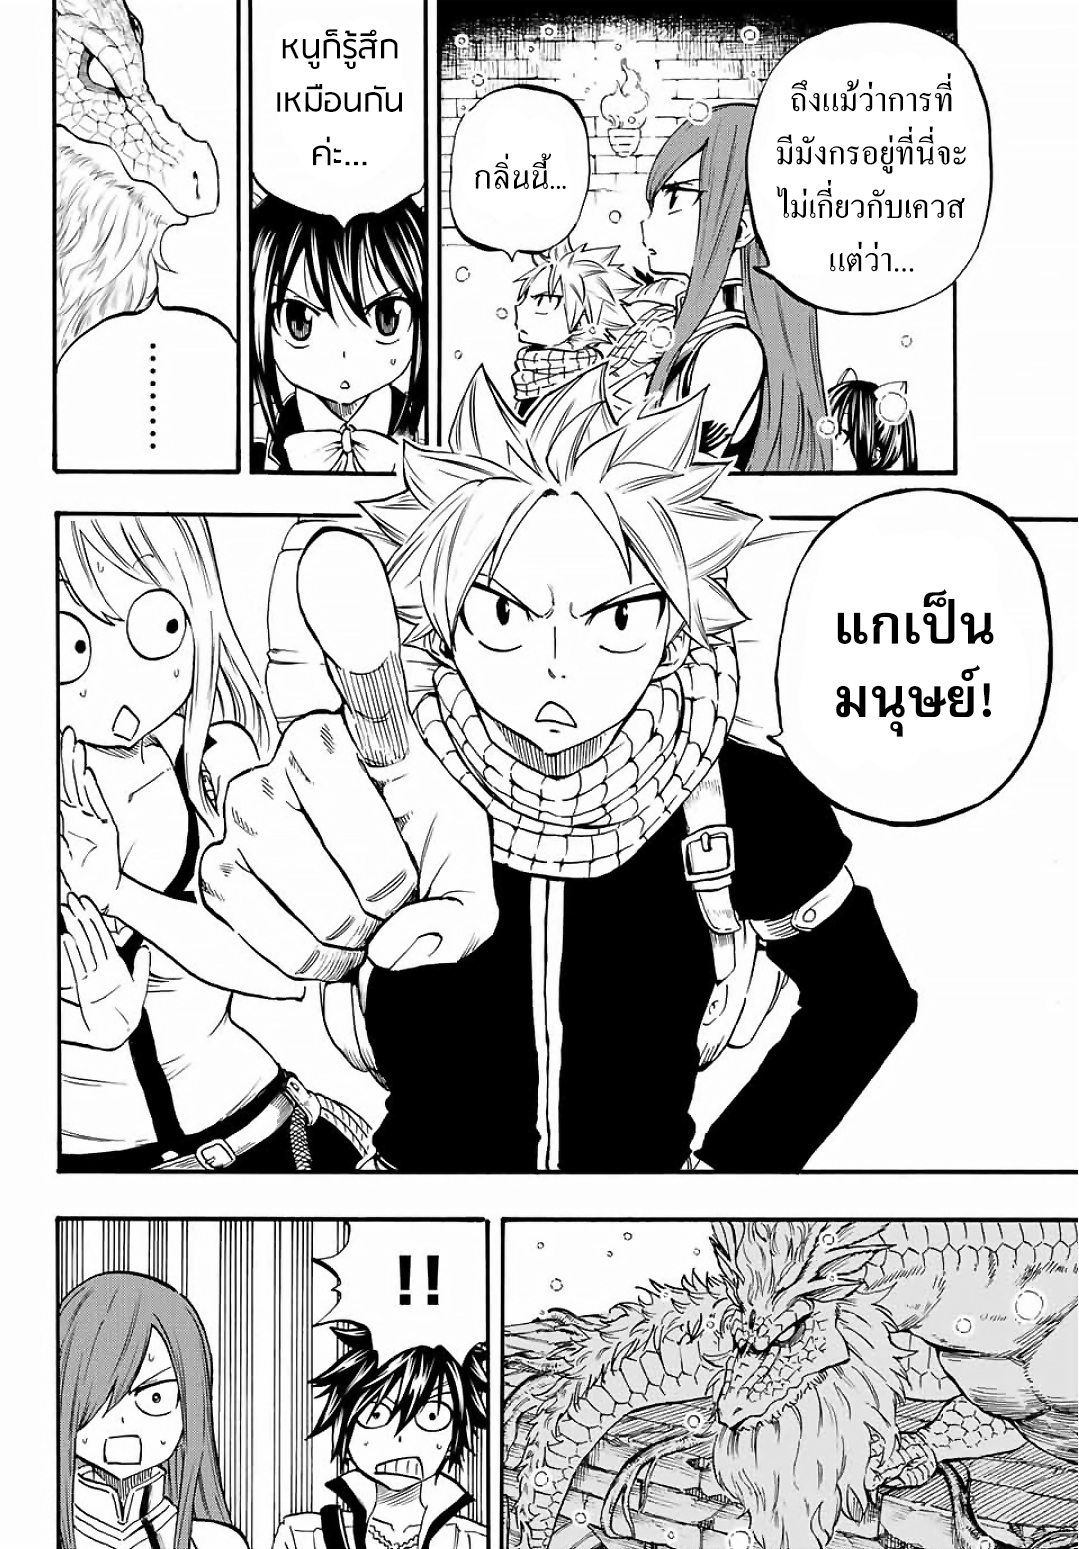 Fairy Tail: 100 Years Quest 2 TH